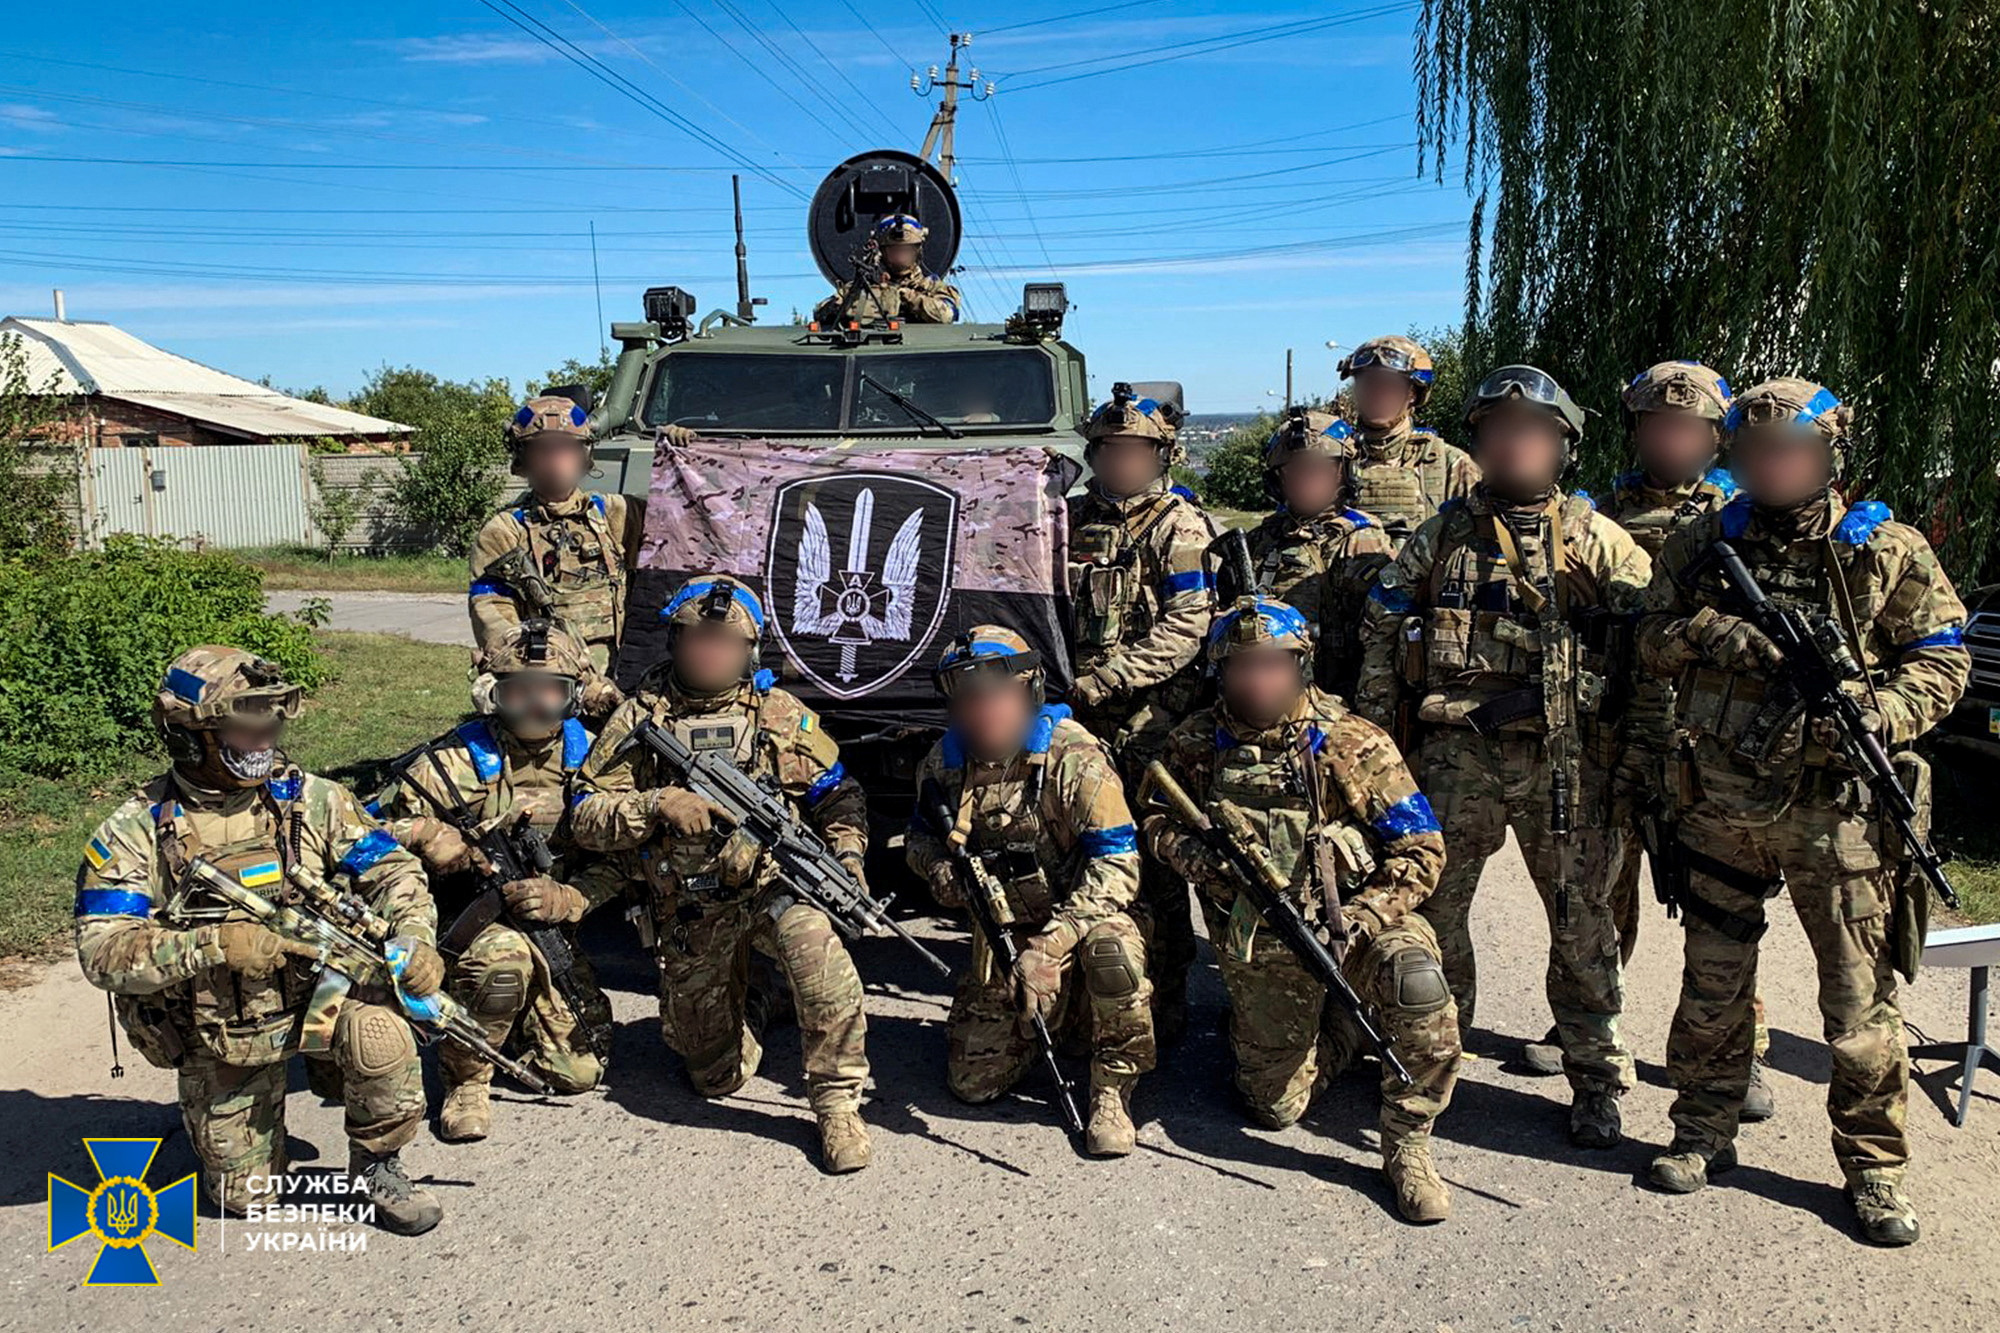 Service members of the State Security Service of Ukraine pose for a picture in the recently liberated town of Kupiansk